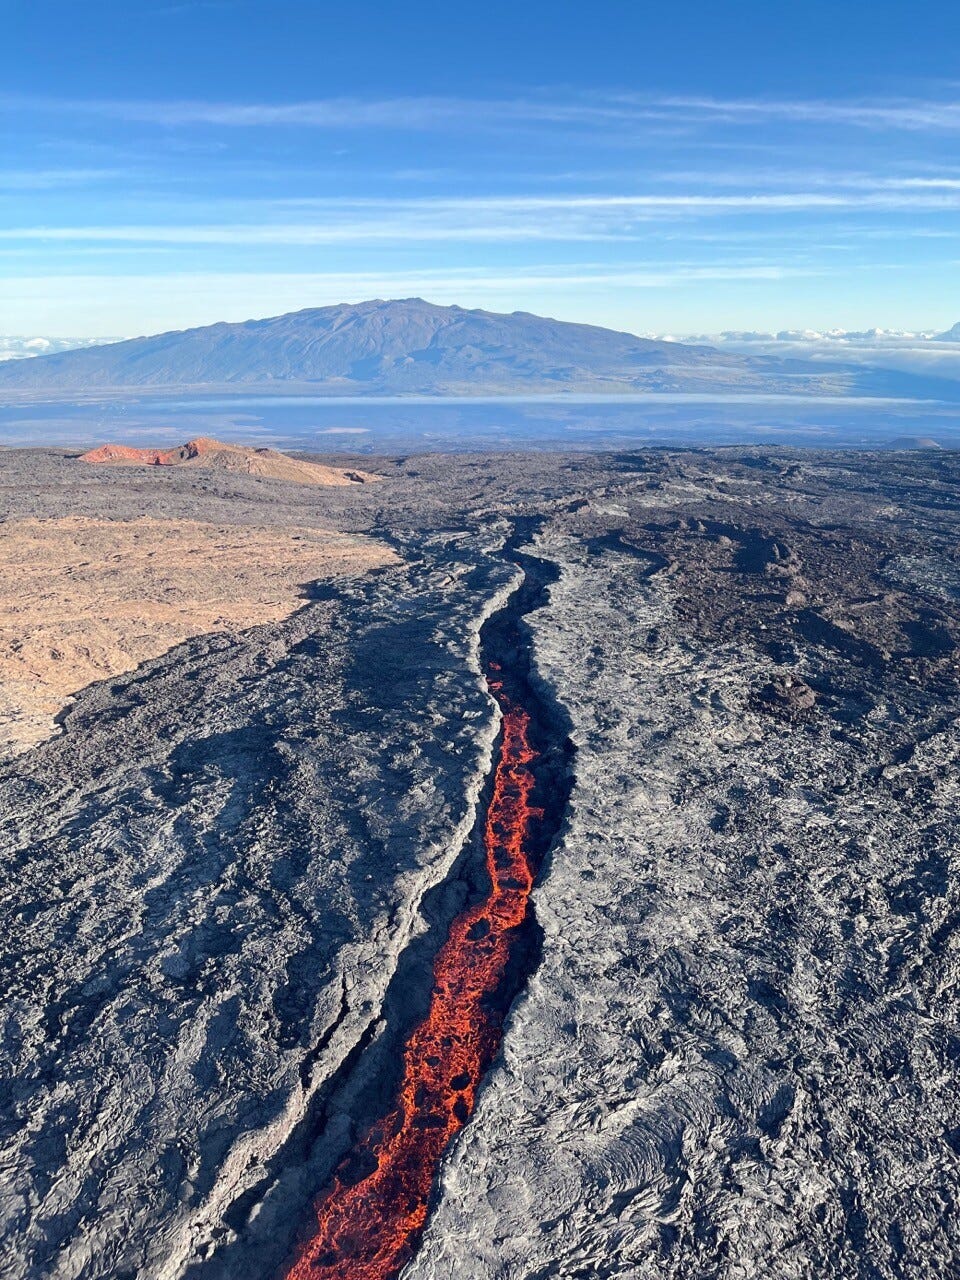 Aerial image of the lava channel issuing from fissure 3, erupting high on the Northeast Rift Zone of Mauna Loa. The reduced lava output at fissure 3 is evident in the low level of lava in the channel. Mauna Kea is visible in the background of the image. USGS image by P. Dotray. 